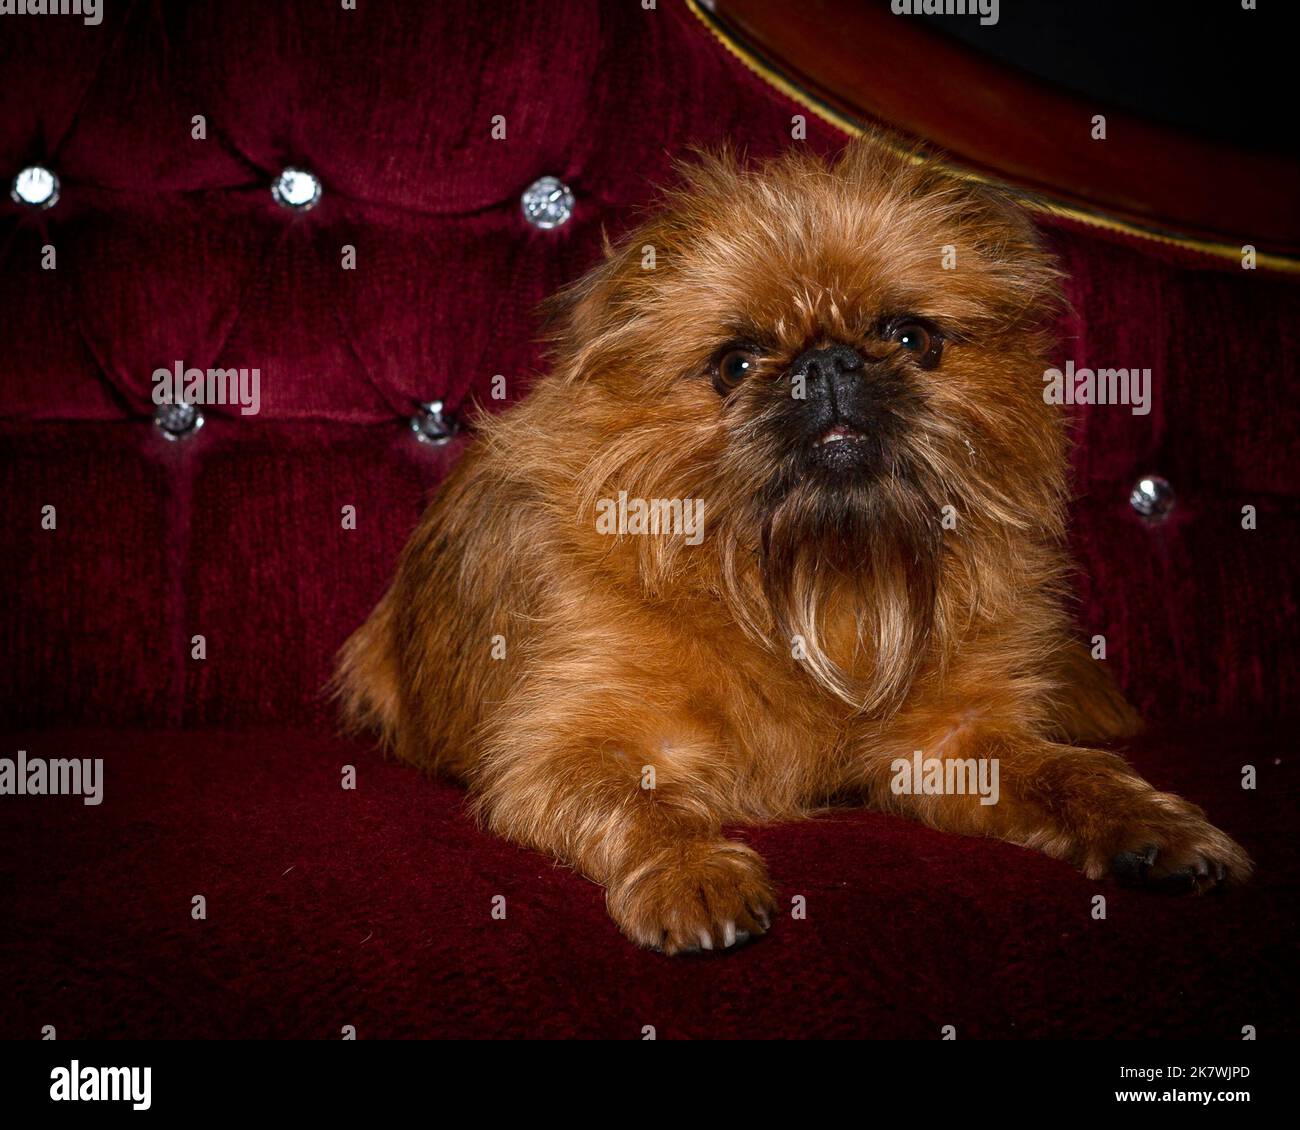 Picture of a Griffon Dog in a Professional Studio Environment Stock Photo